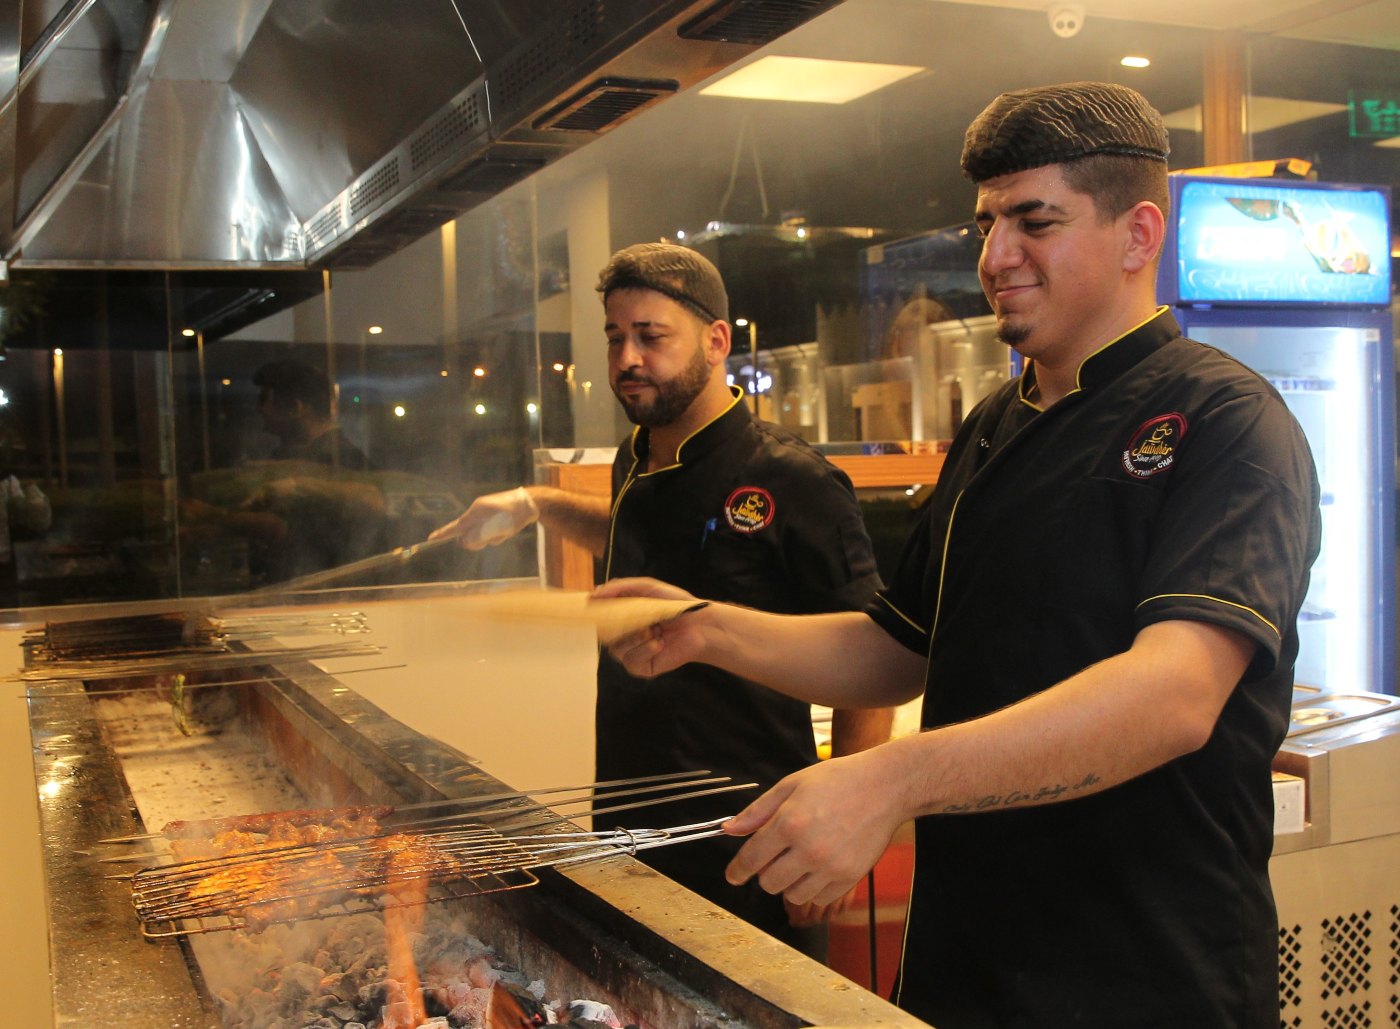 Workers grill meat at a restaurant in Doha, Qatar (MEE/Abu Muhammad)